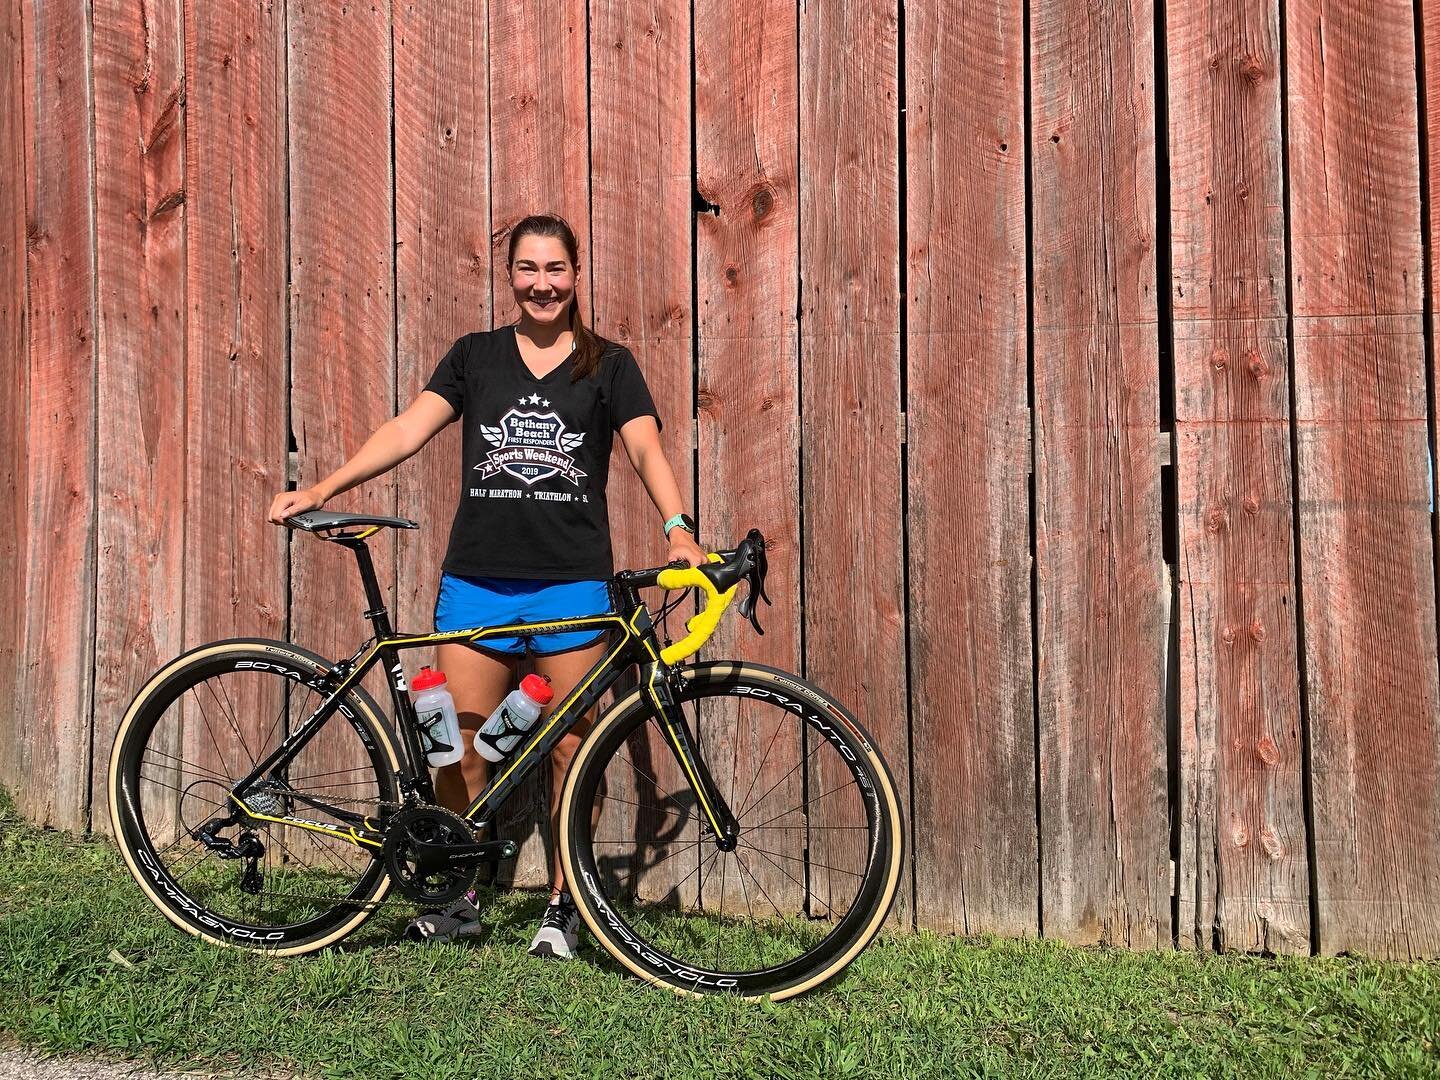 Becca was beyond patient as we awaited bits and pieces to complete this custom Focus Cayo build for her. 

As a triathlete, she needed something built for speed with the ability to train on it while also being race day ready. With Shawn&rsquo;s guida